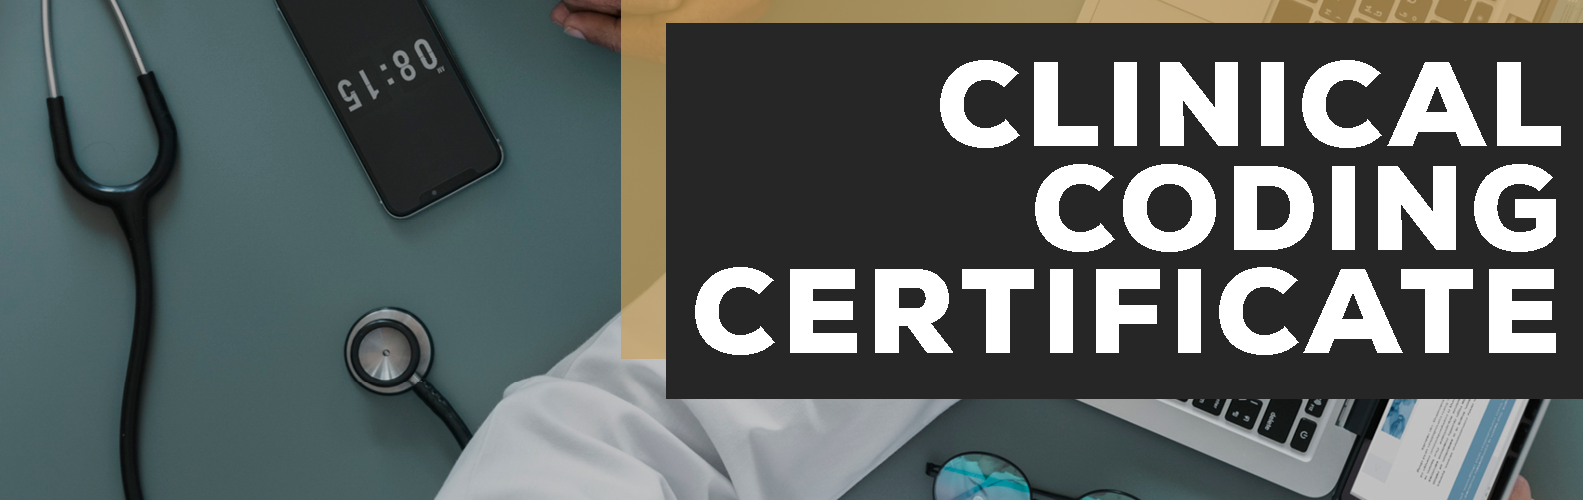 Clinical Coding Certificate